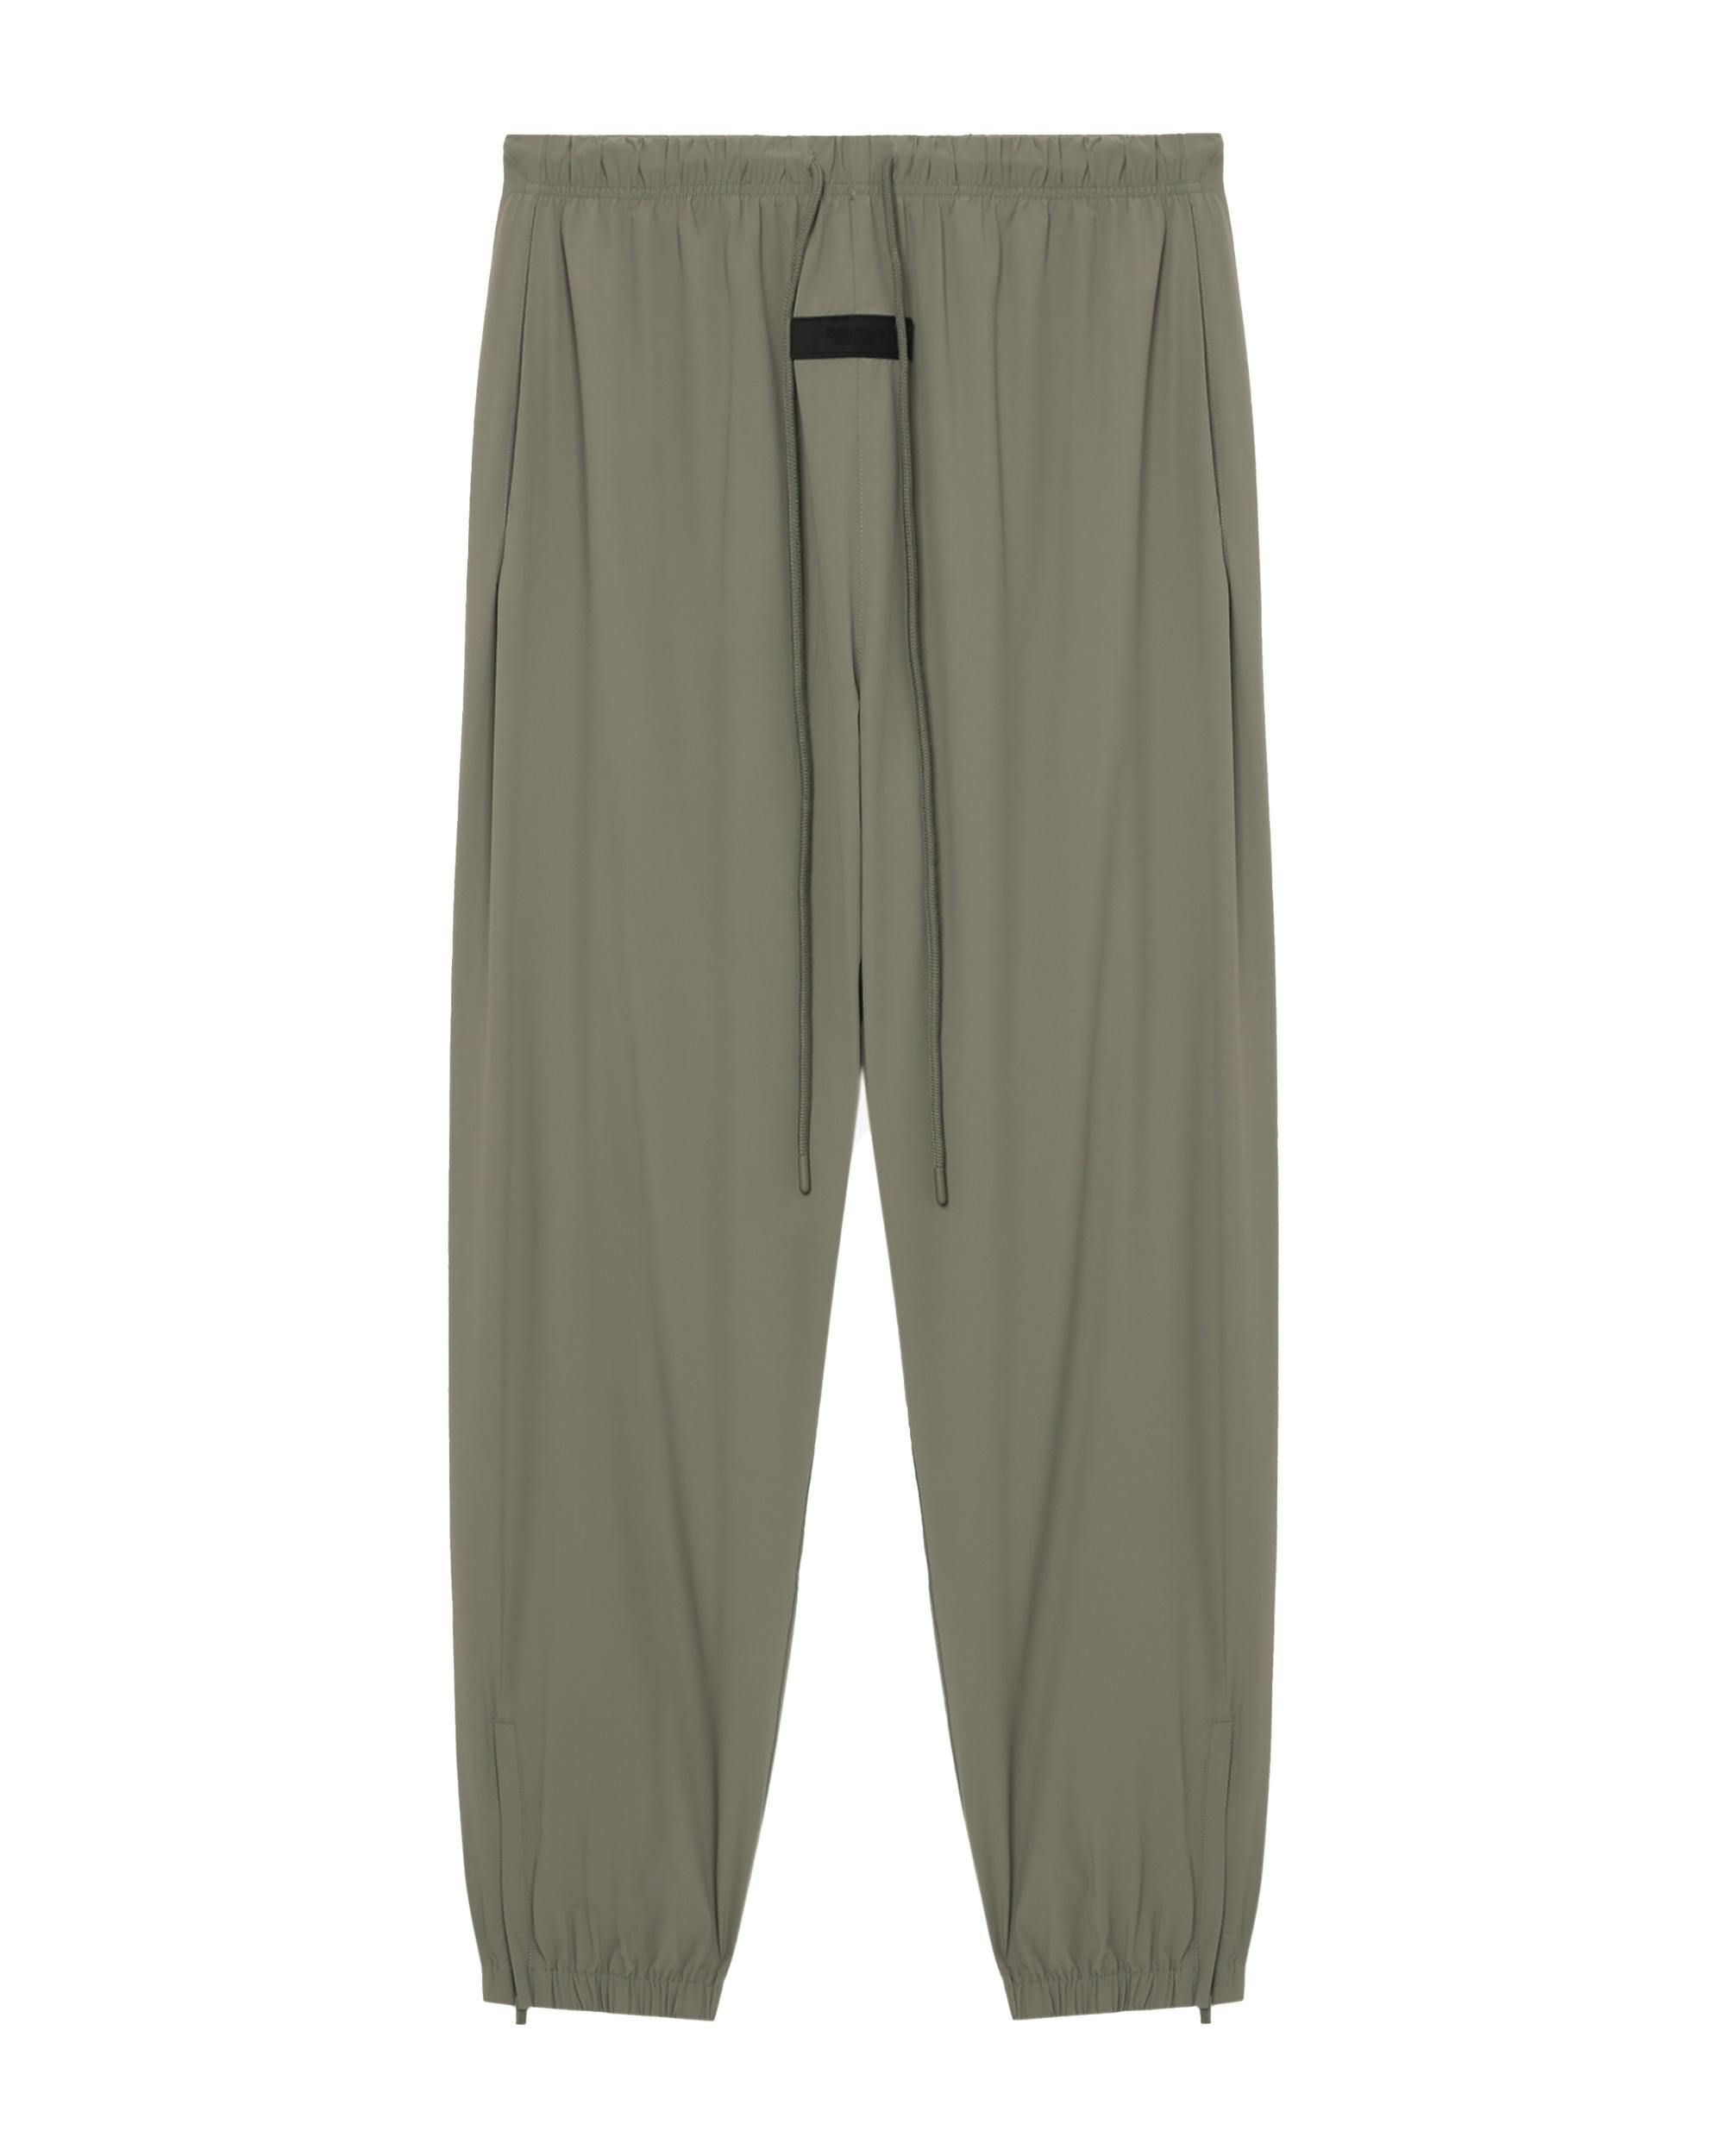 Nylon trackpants by ESSENTIALS